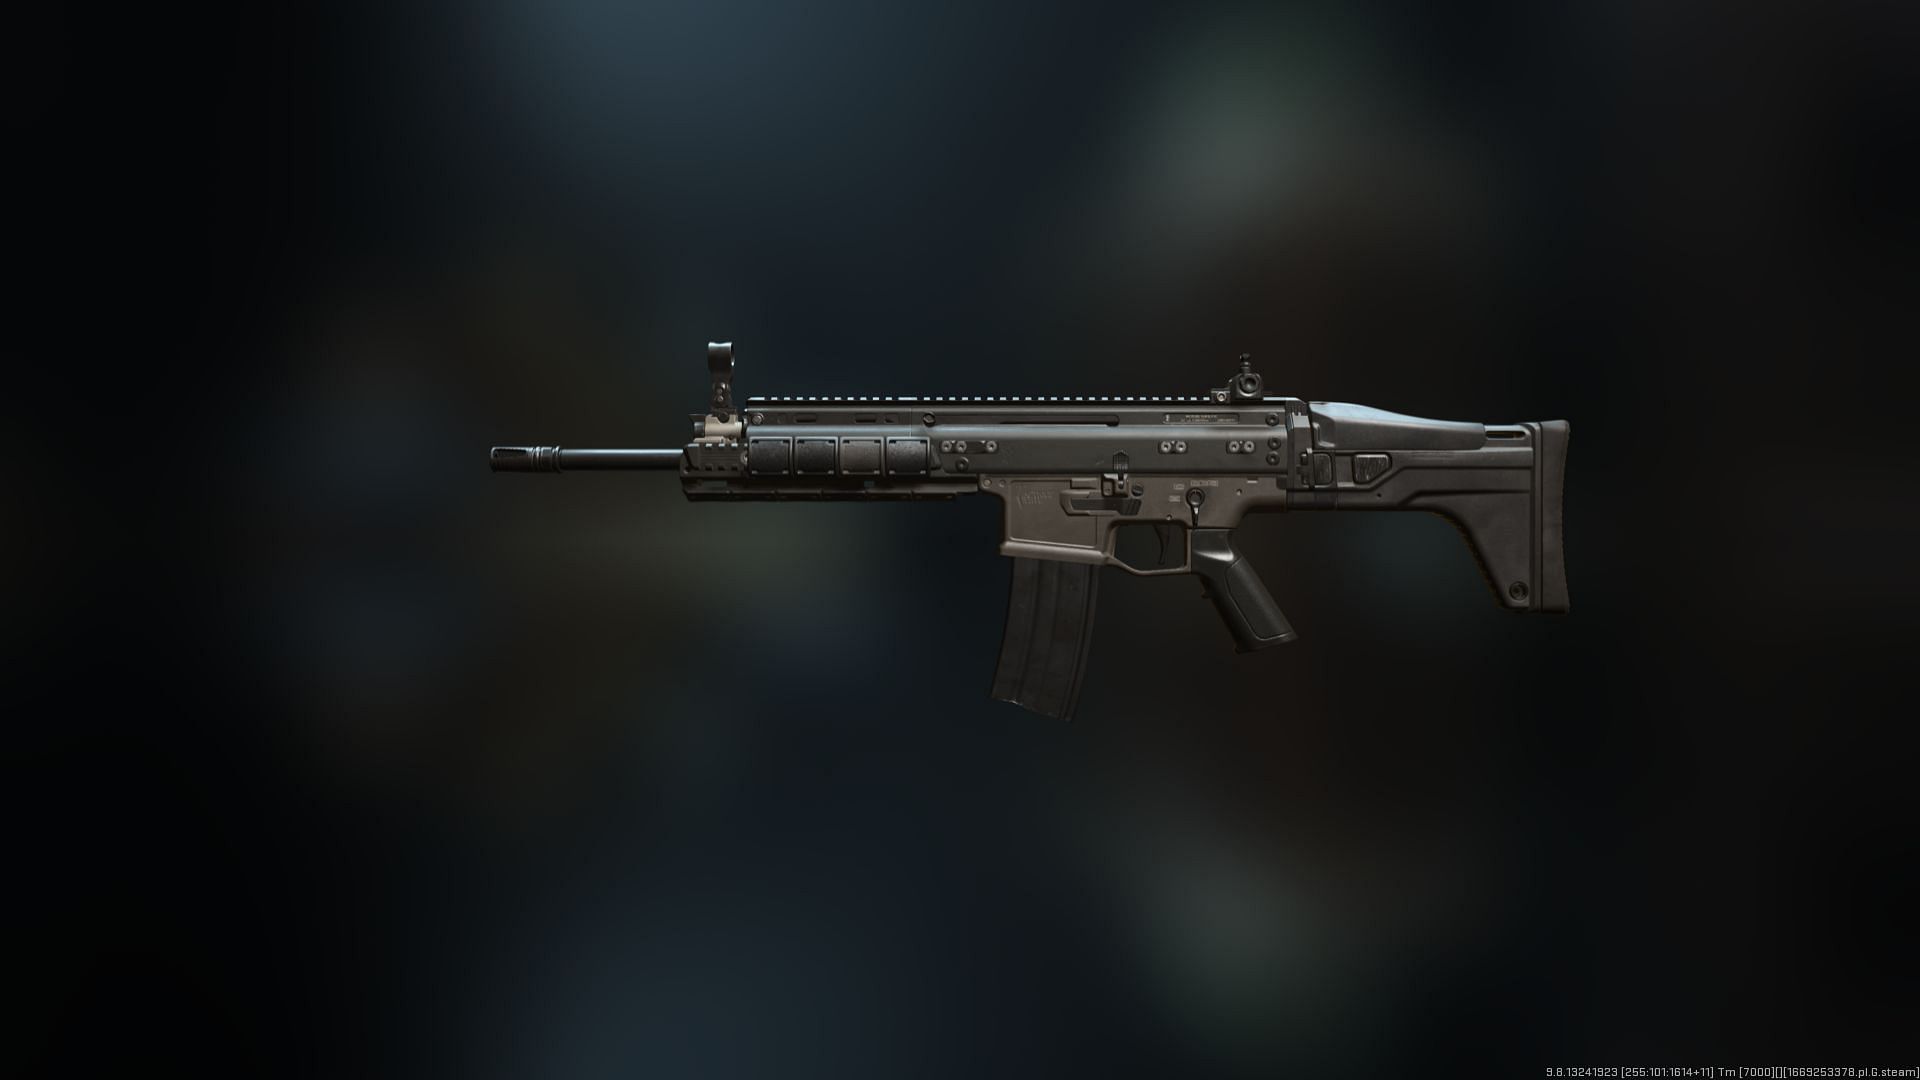 The TAQ-56 assault rifle in Modern Warfare 2 and Warzone 2 (Image via Activision)